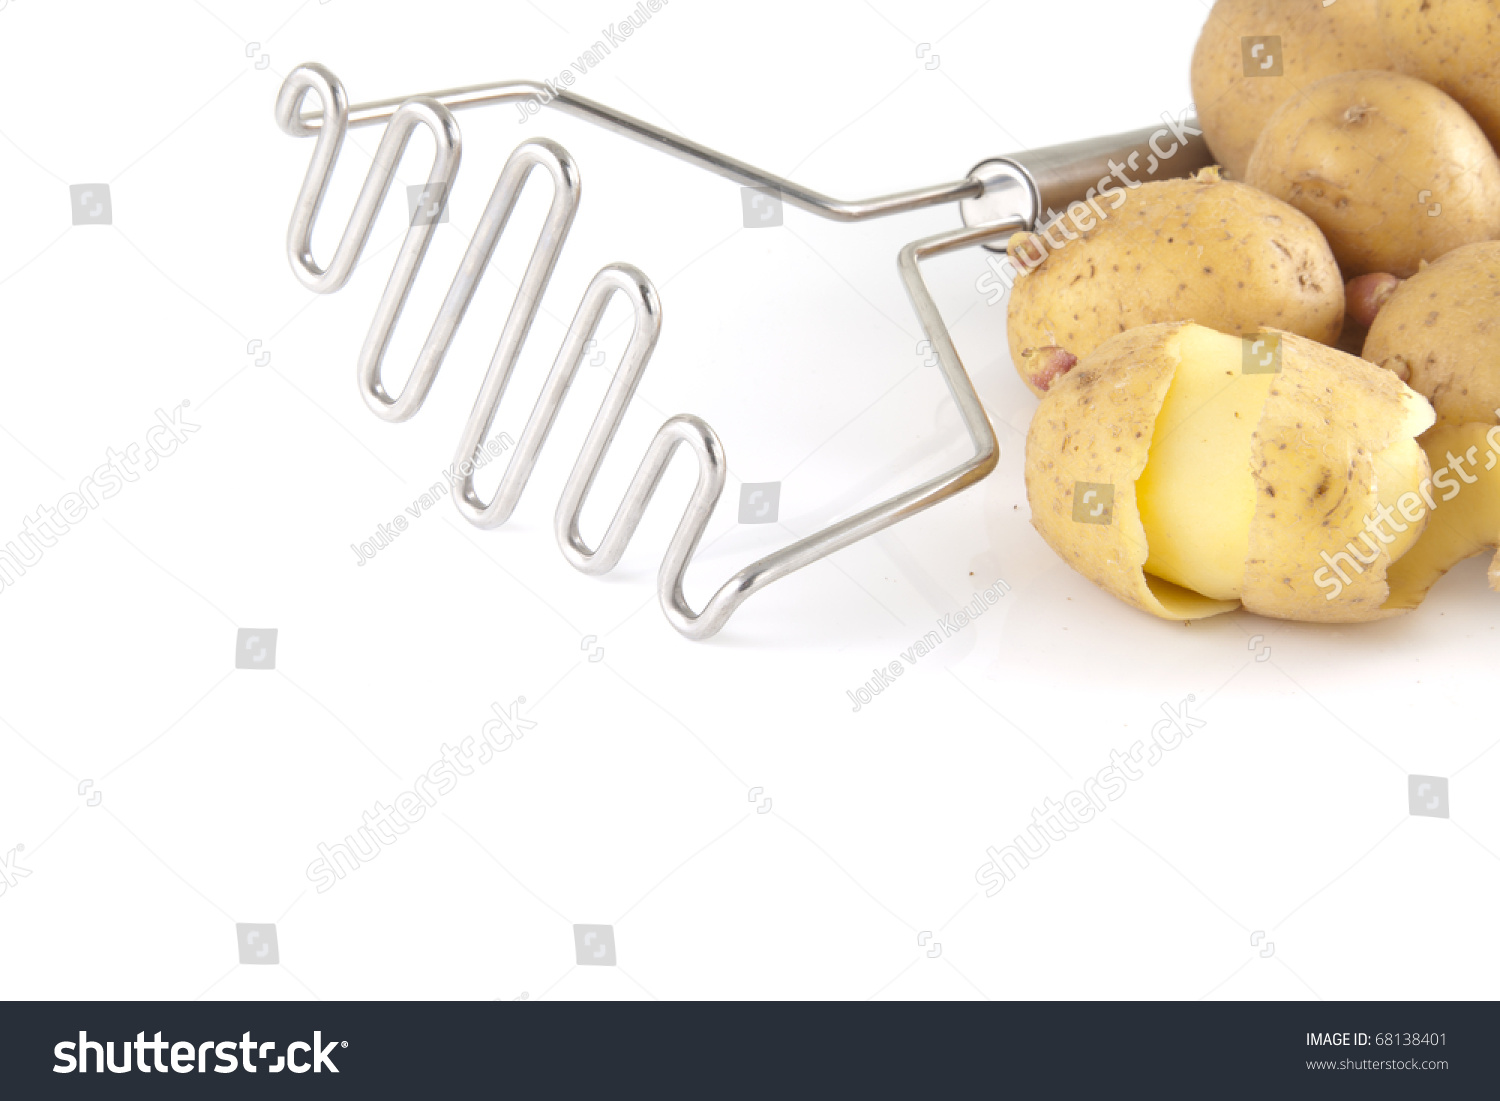 Masher with potatoes on a white background. #68138401